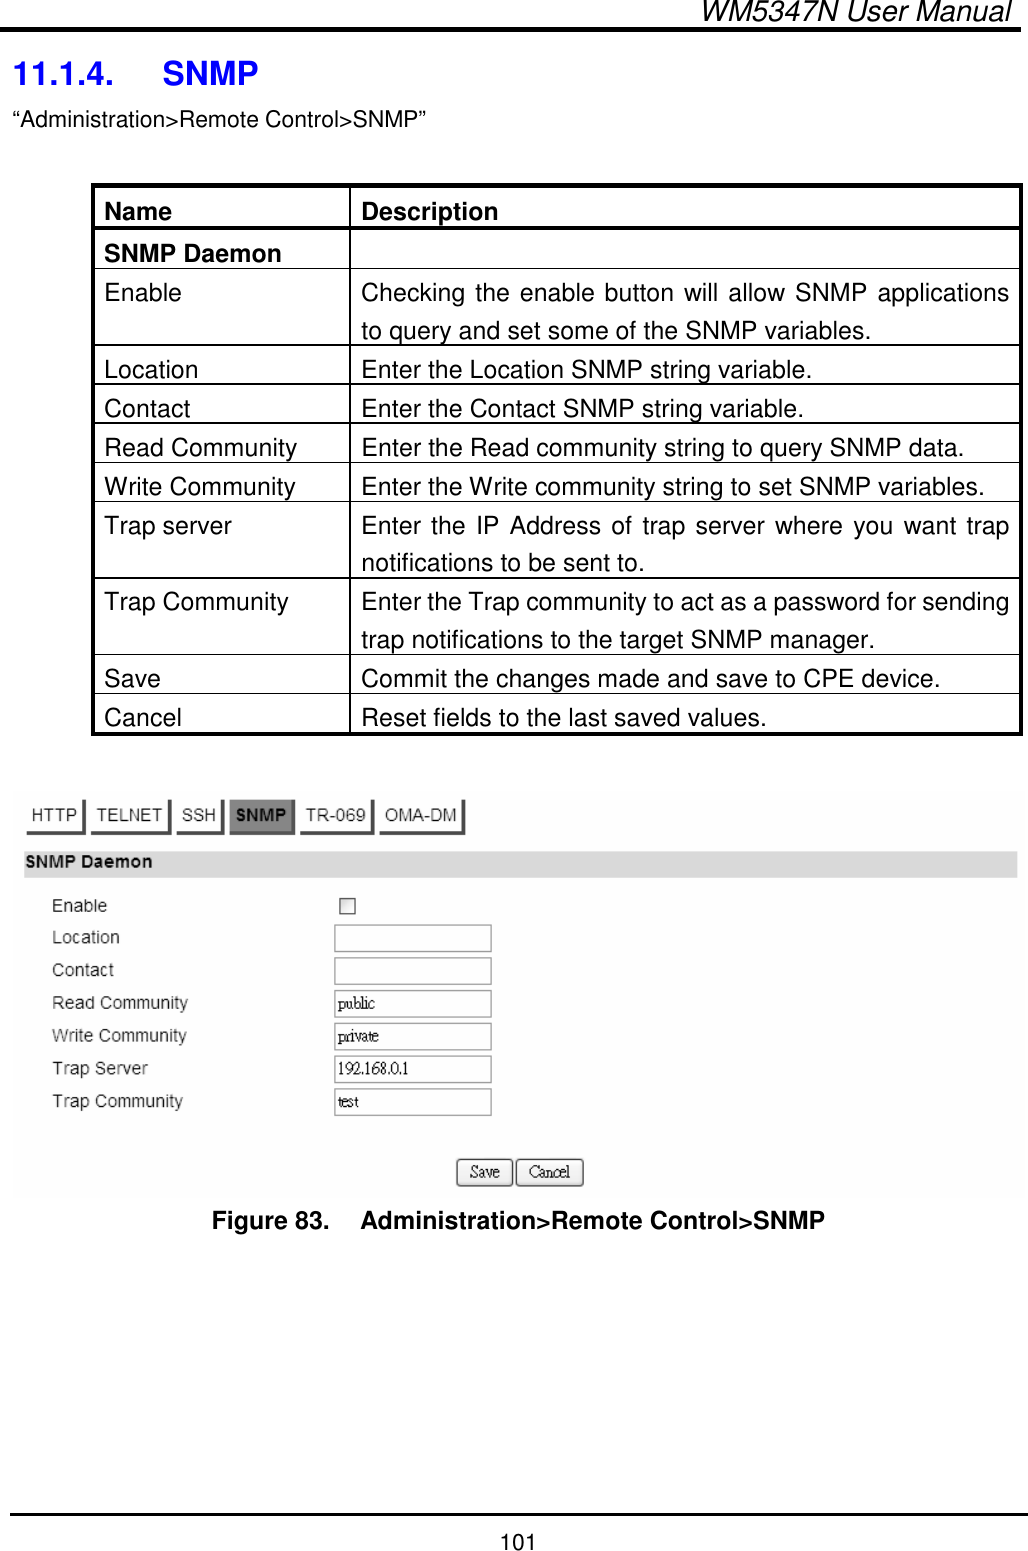  WM5347N User Manual  101 11.1.4.  SNMP “Administration&gt;Remote Control&gt;SNMP”  Name  Description SNMP Daemon   Enable  Checking the enable button will allow SNMP applications to query and set some of the SNMP variables. Location  Enter the Location SNMP string variable. Contact Enter the Contact SNMP string variable. Read Community  Enter the Read community string to query SNMP data. Write Community  Enter the Write community string to set SNMP variables. Trap server  Enter the IP Address of trap server where you want trap notifications to be sent to. Trap Community  Enter the Trap community to act as a password for sending trap notifications to the target SNMP manager. Save  Commit the changes made and save to CPE device. Cancel  Reset fields to the last saved values.   Figure 83.   Administration&gt;Remote Control&gt;SNMP       